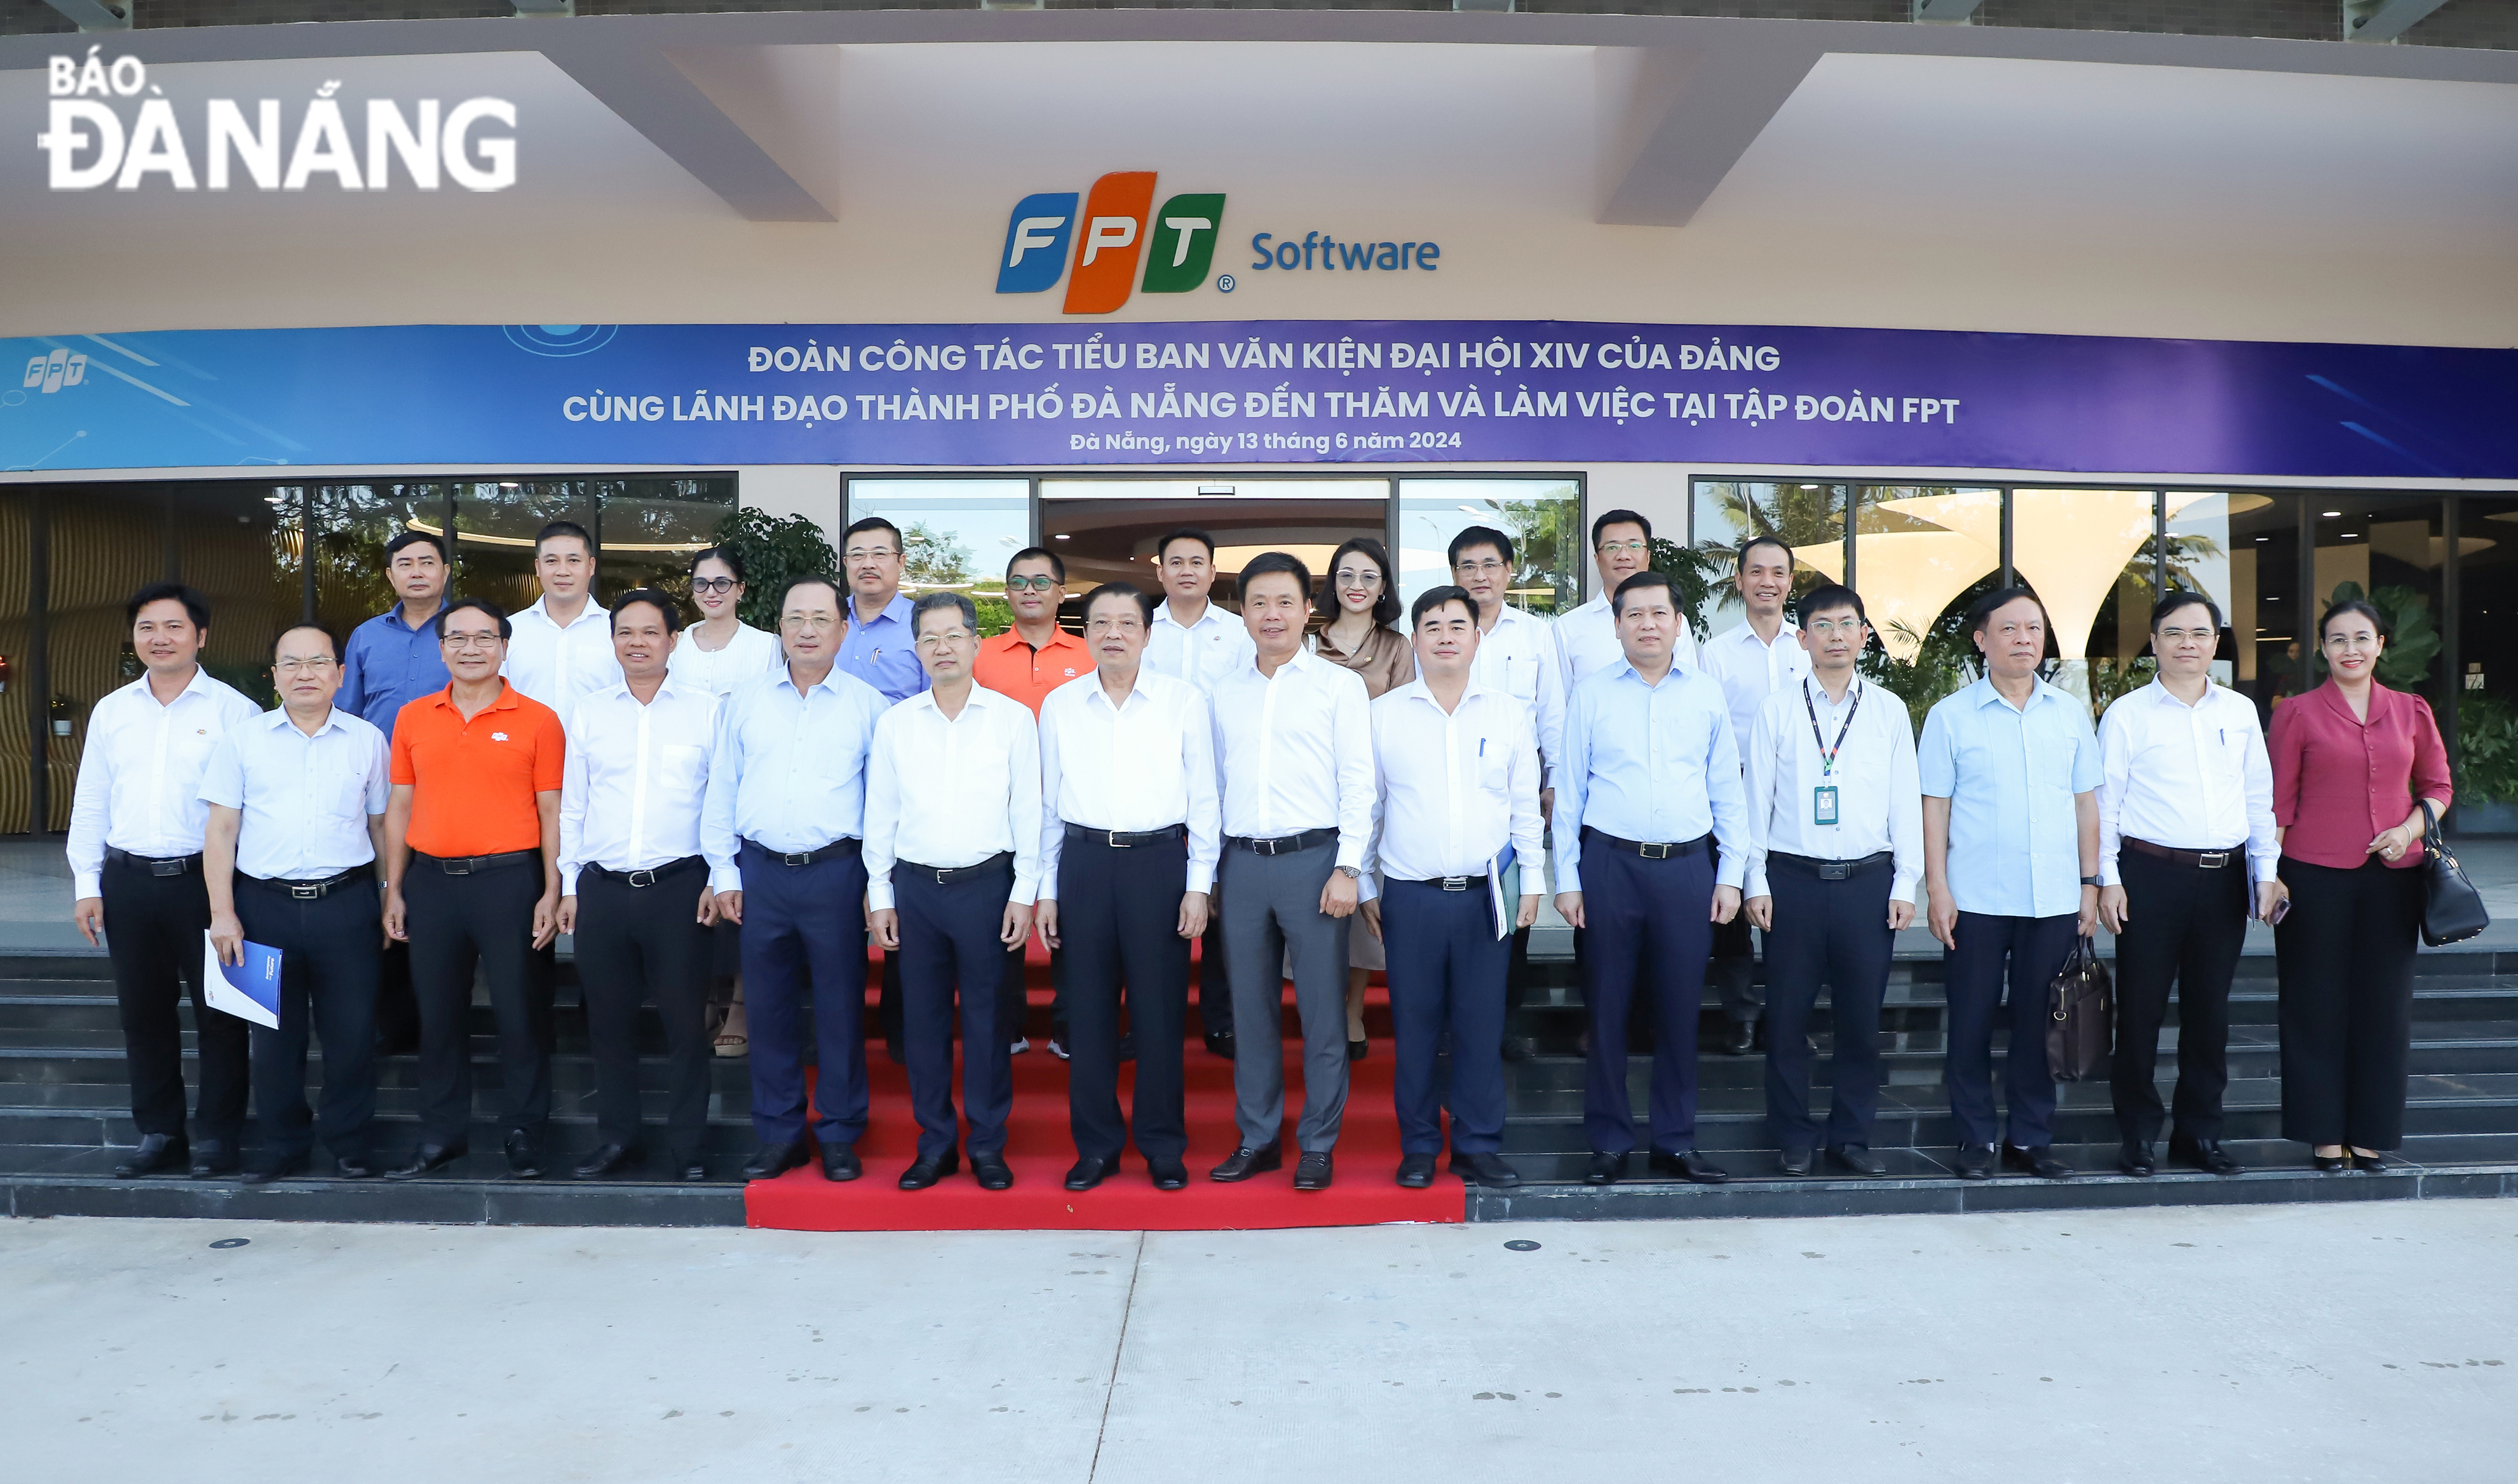 Leaders of the survey team taking a souvenir photo with FPT officials and employees. Photo: NGOC PHU